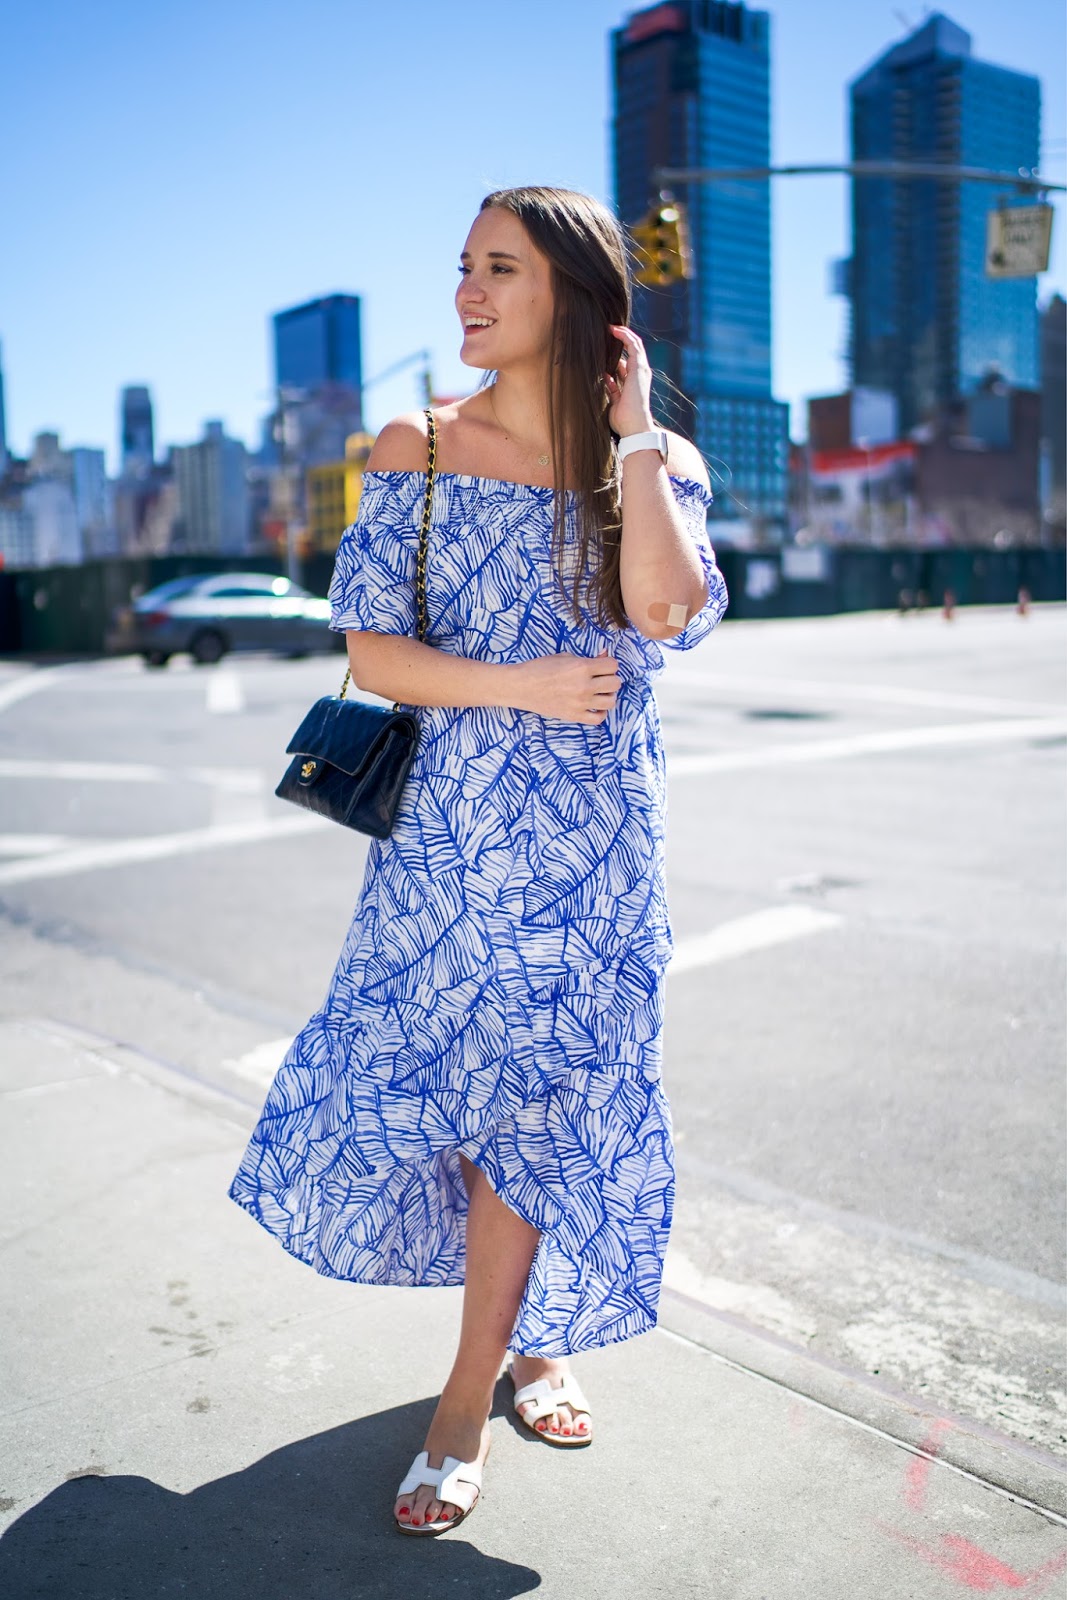 Banana Leaf Dress For Spring by popular New York fashion blogger Covering the Bases